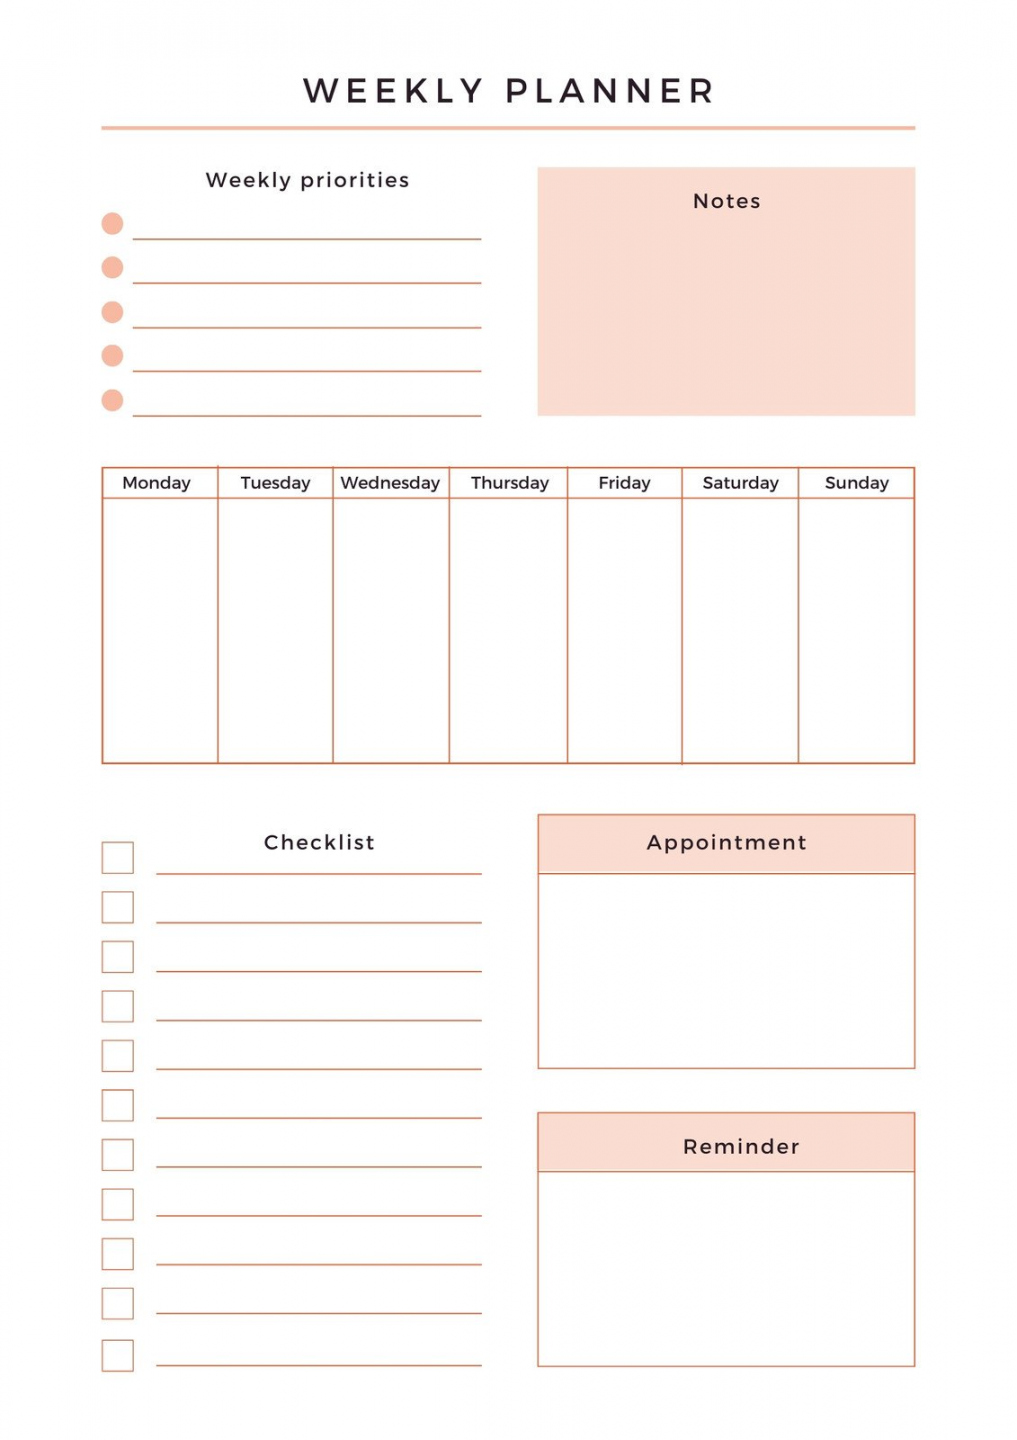 Weekly Planner Printable Free - Printable - Free, printable planner templates to customize  Canva